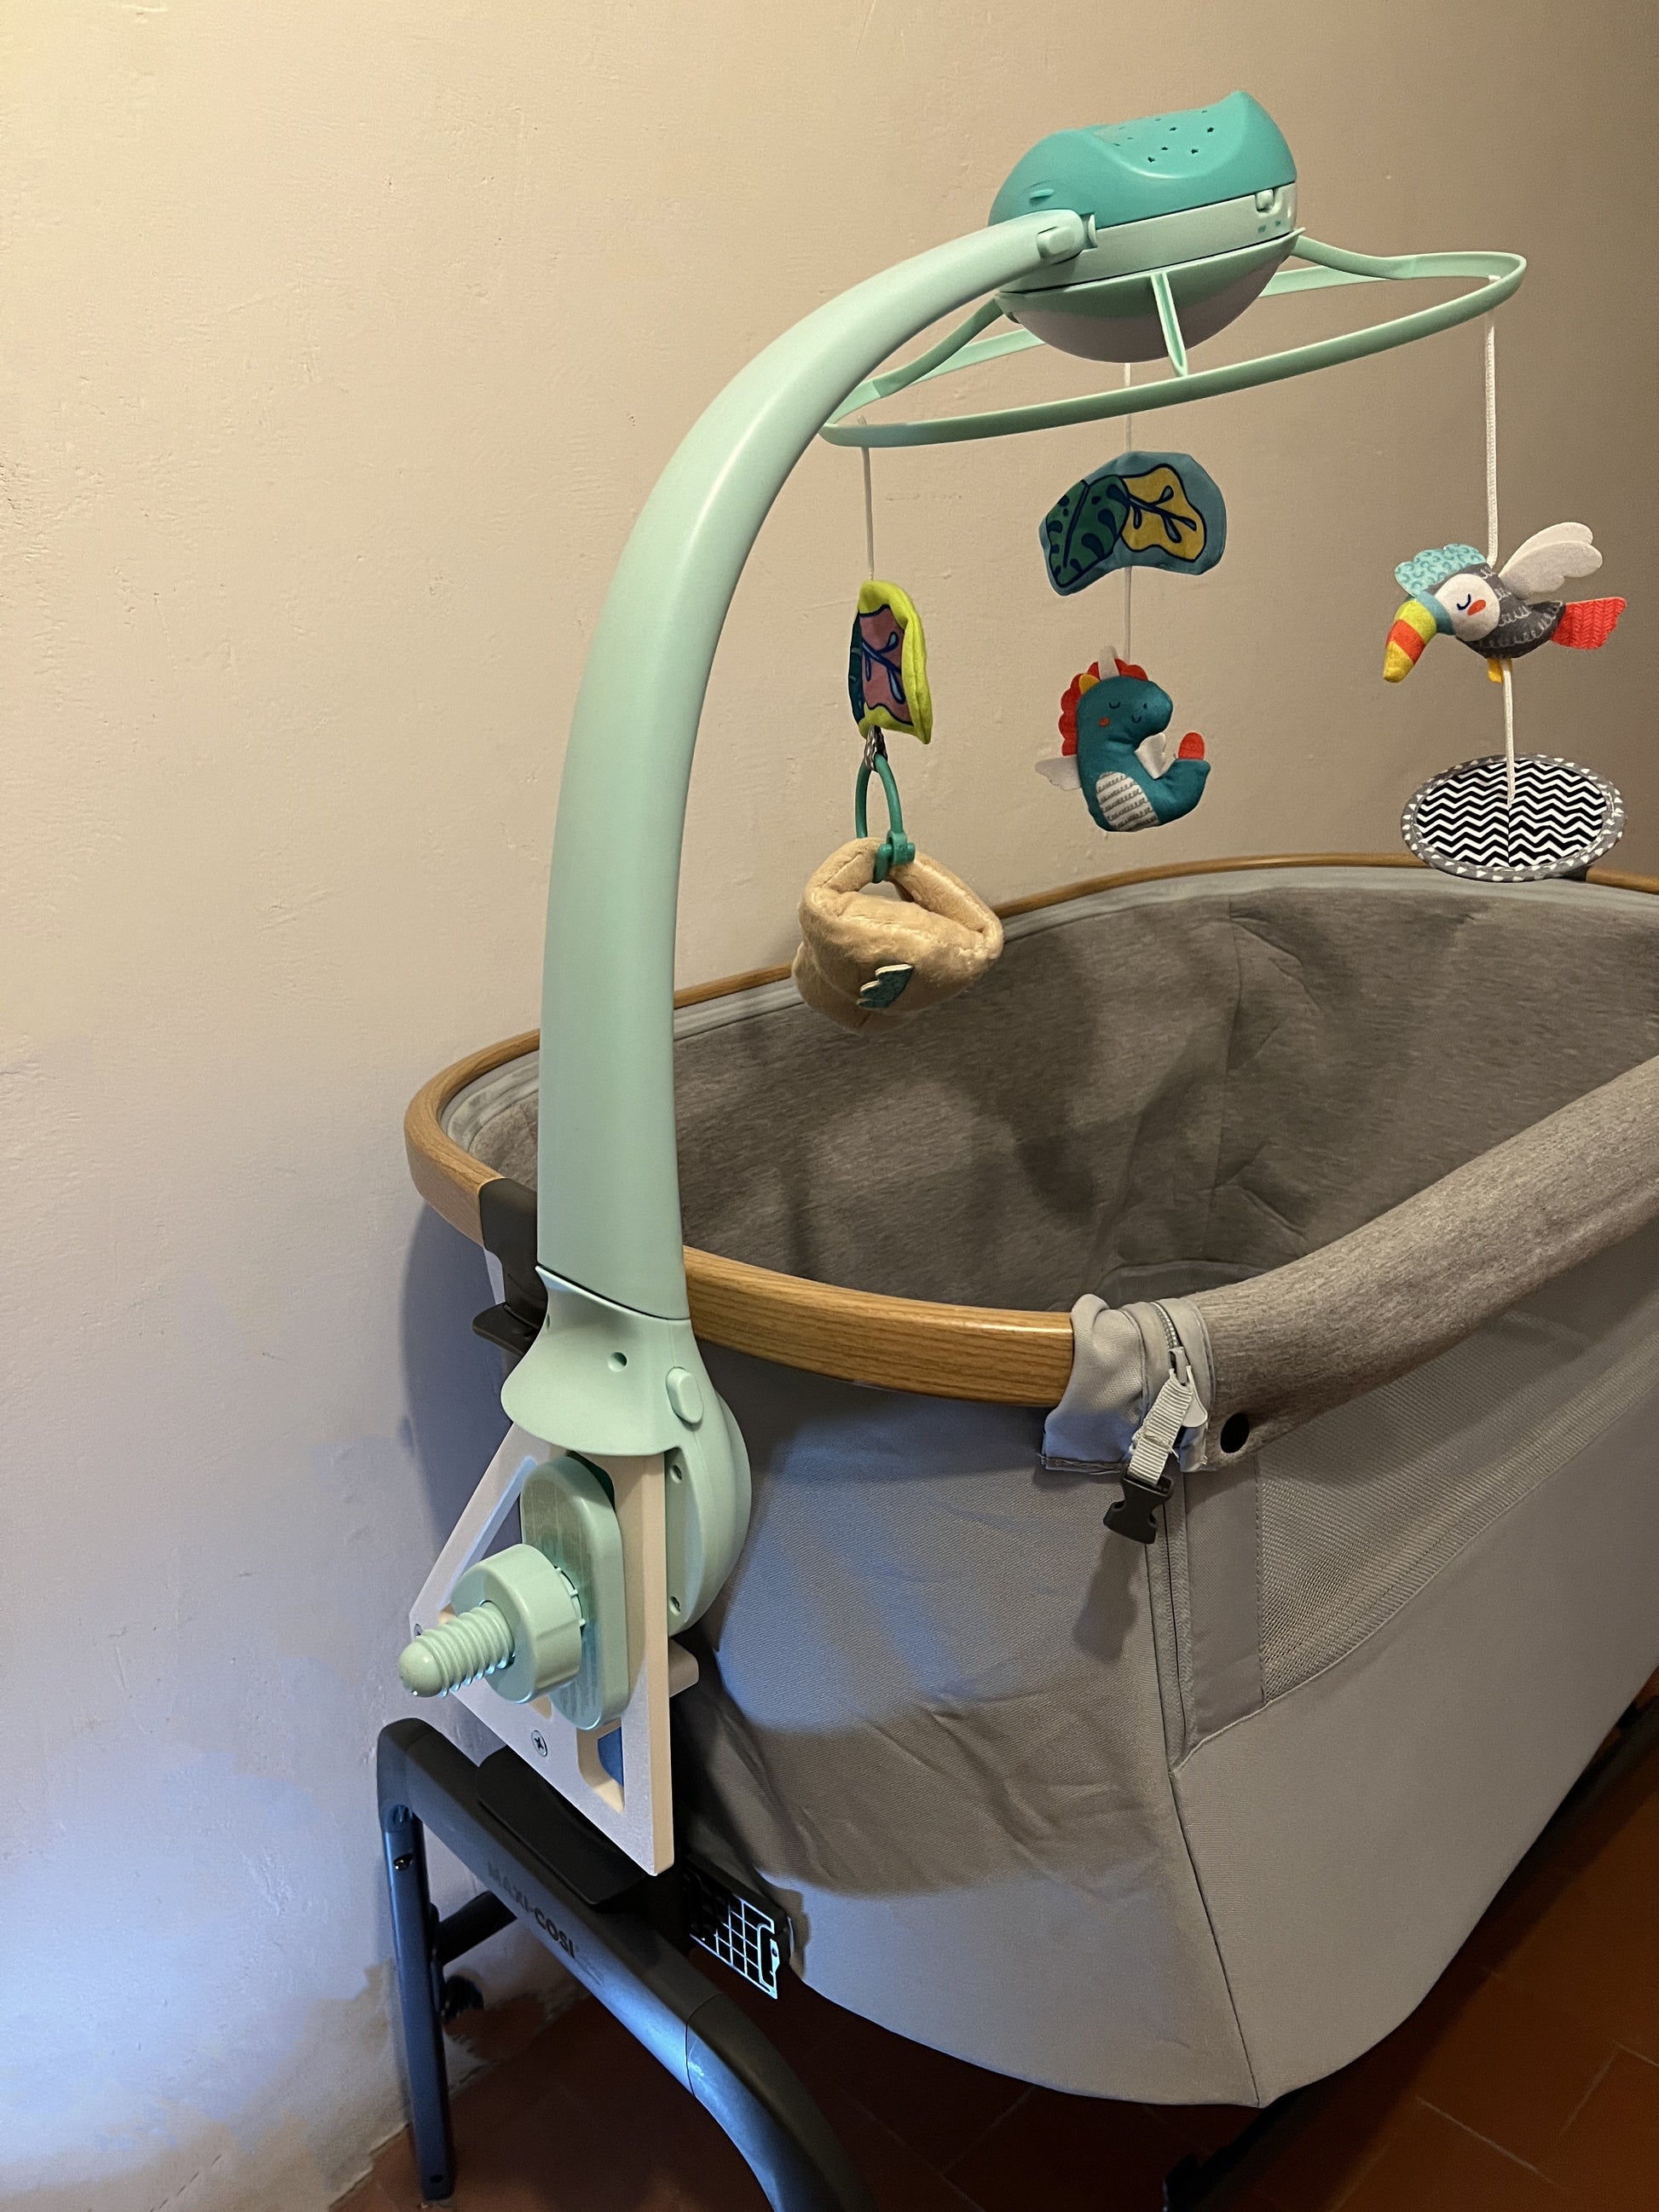 Adapter bracket used to attach the Infantino 3 in 1 musical mobile to co sleeper, shows full bedside crib